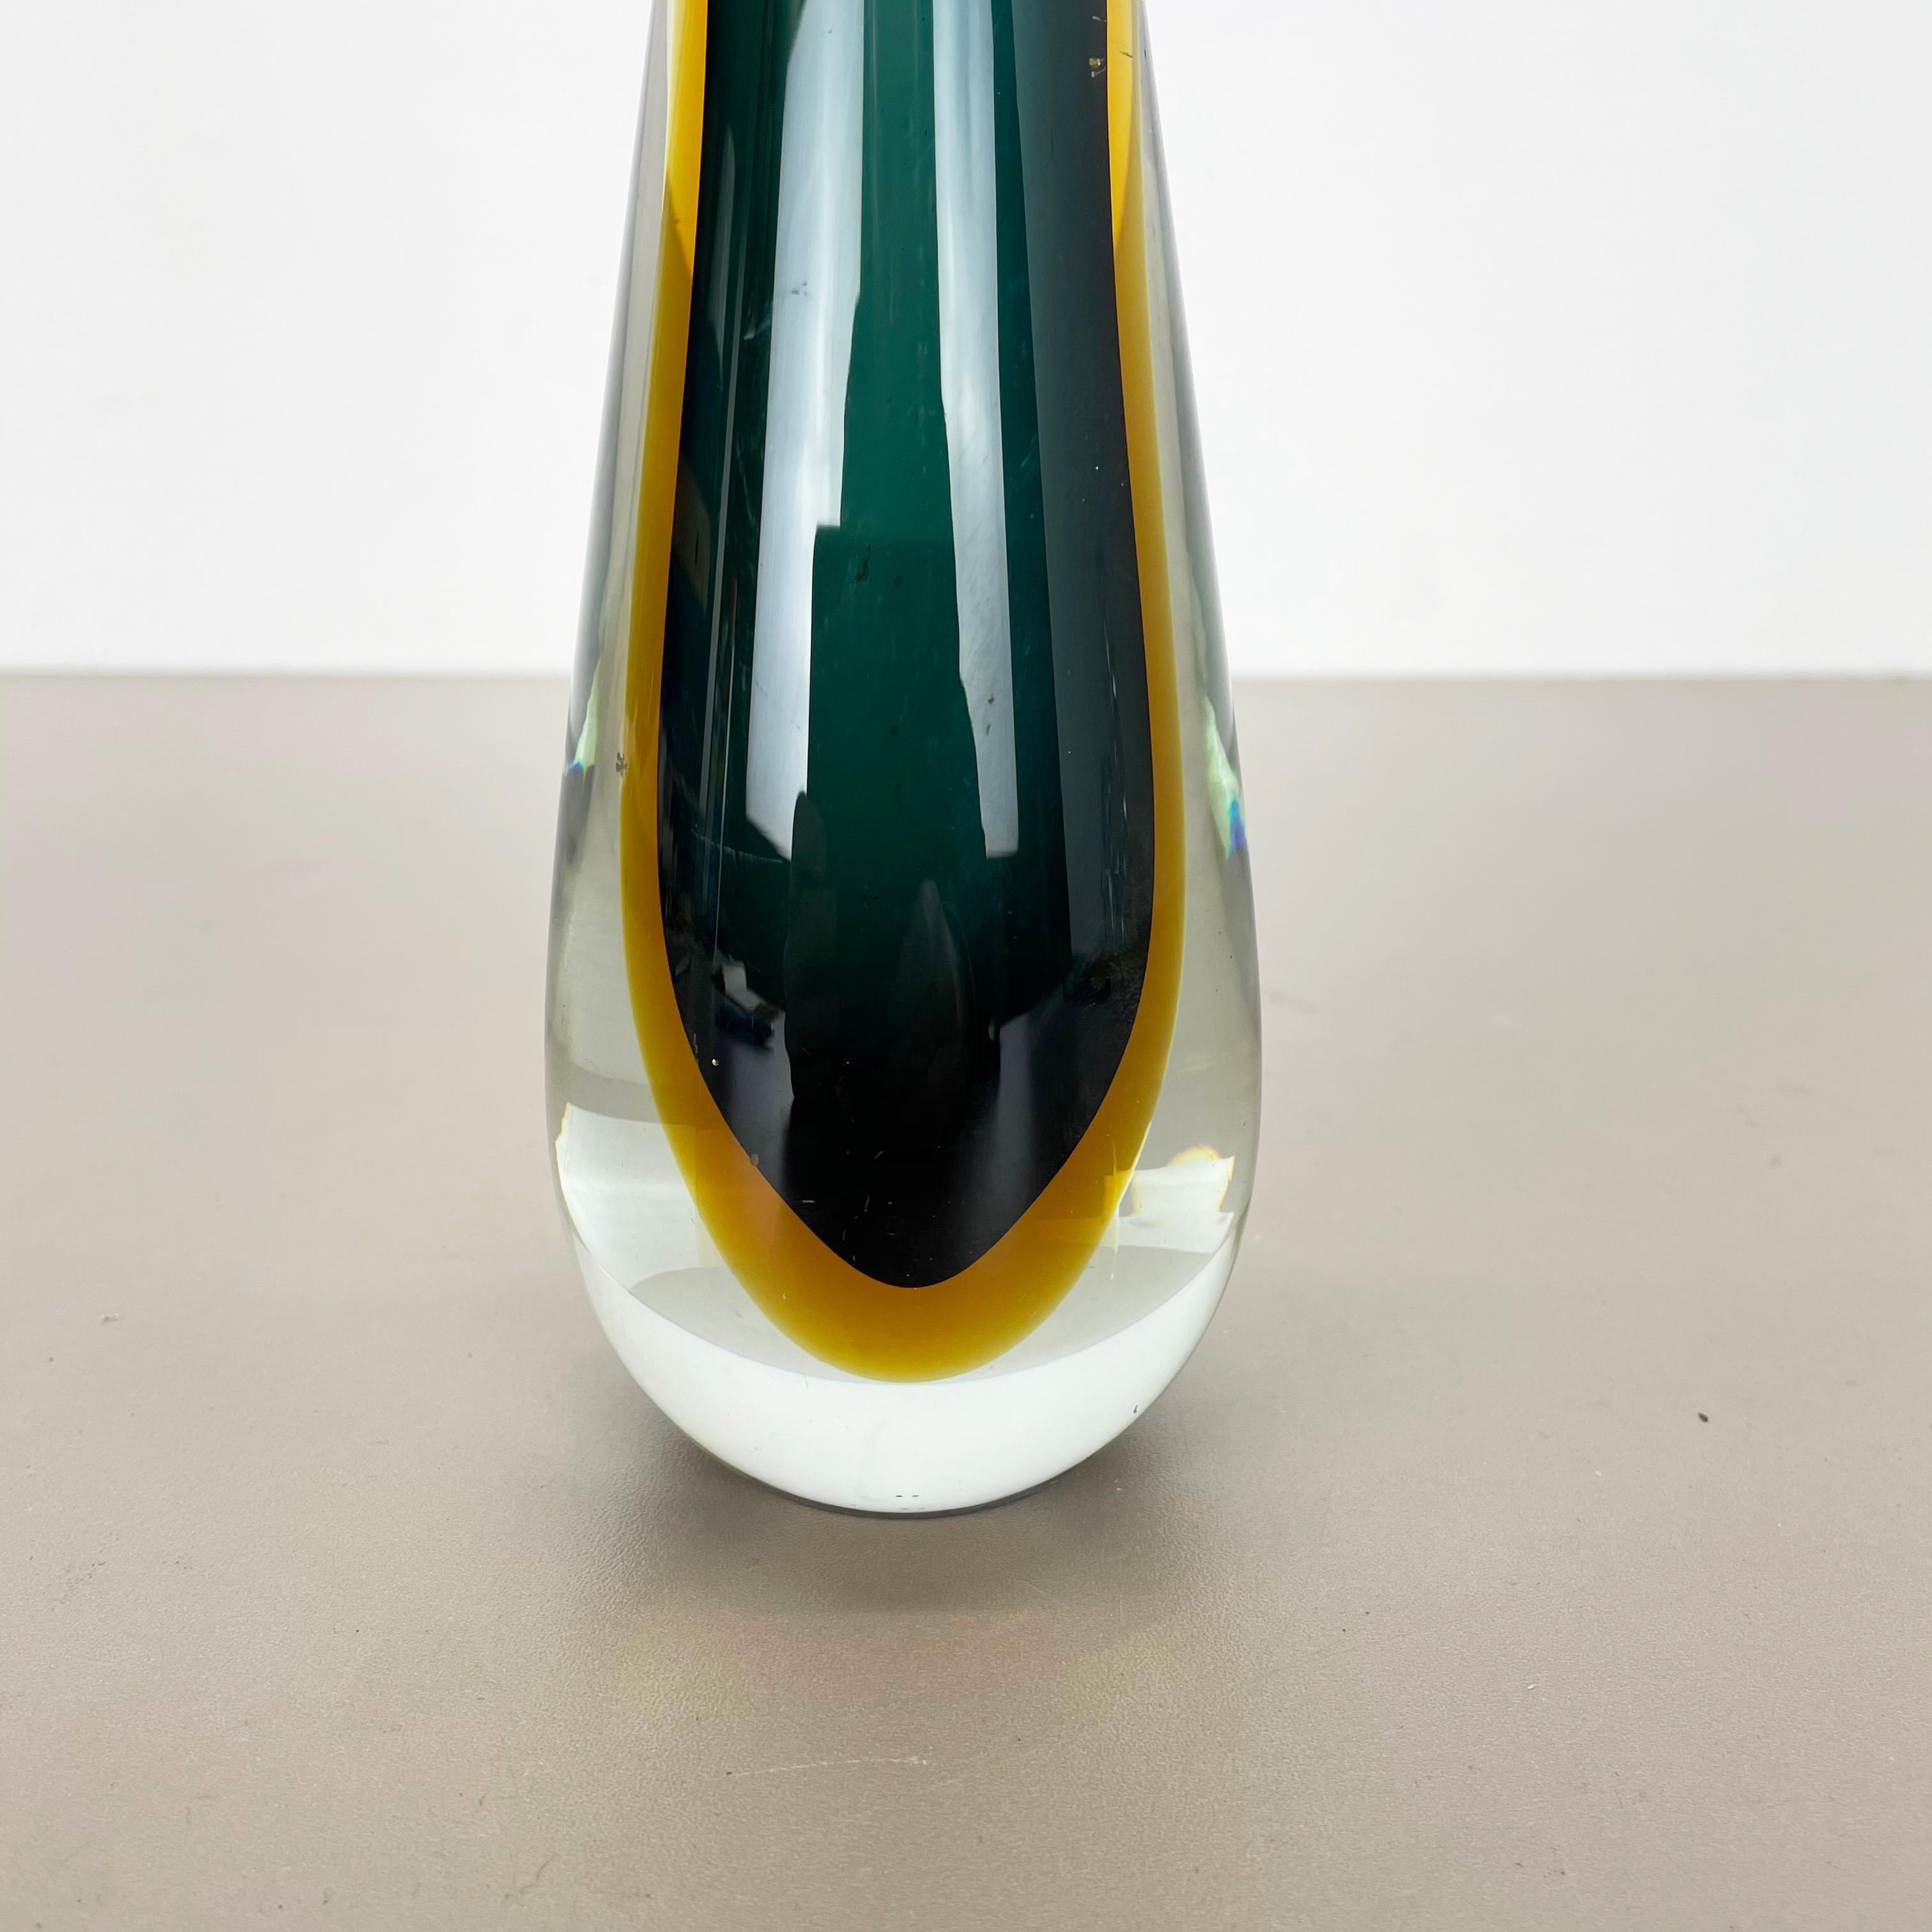 Italian Large Murano Glass Sommerso Vase Designed by Flavio Poli Attributed Italy 1970s For Sale